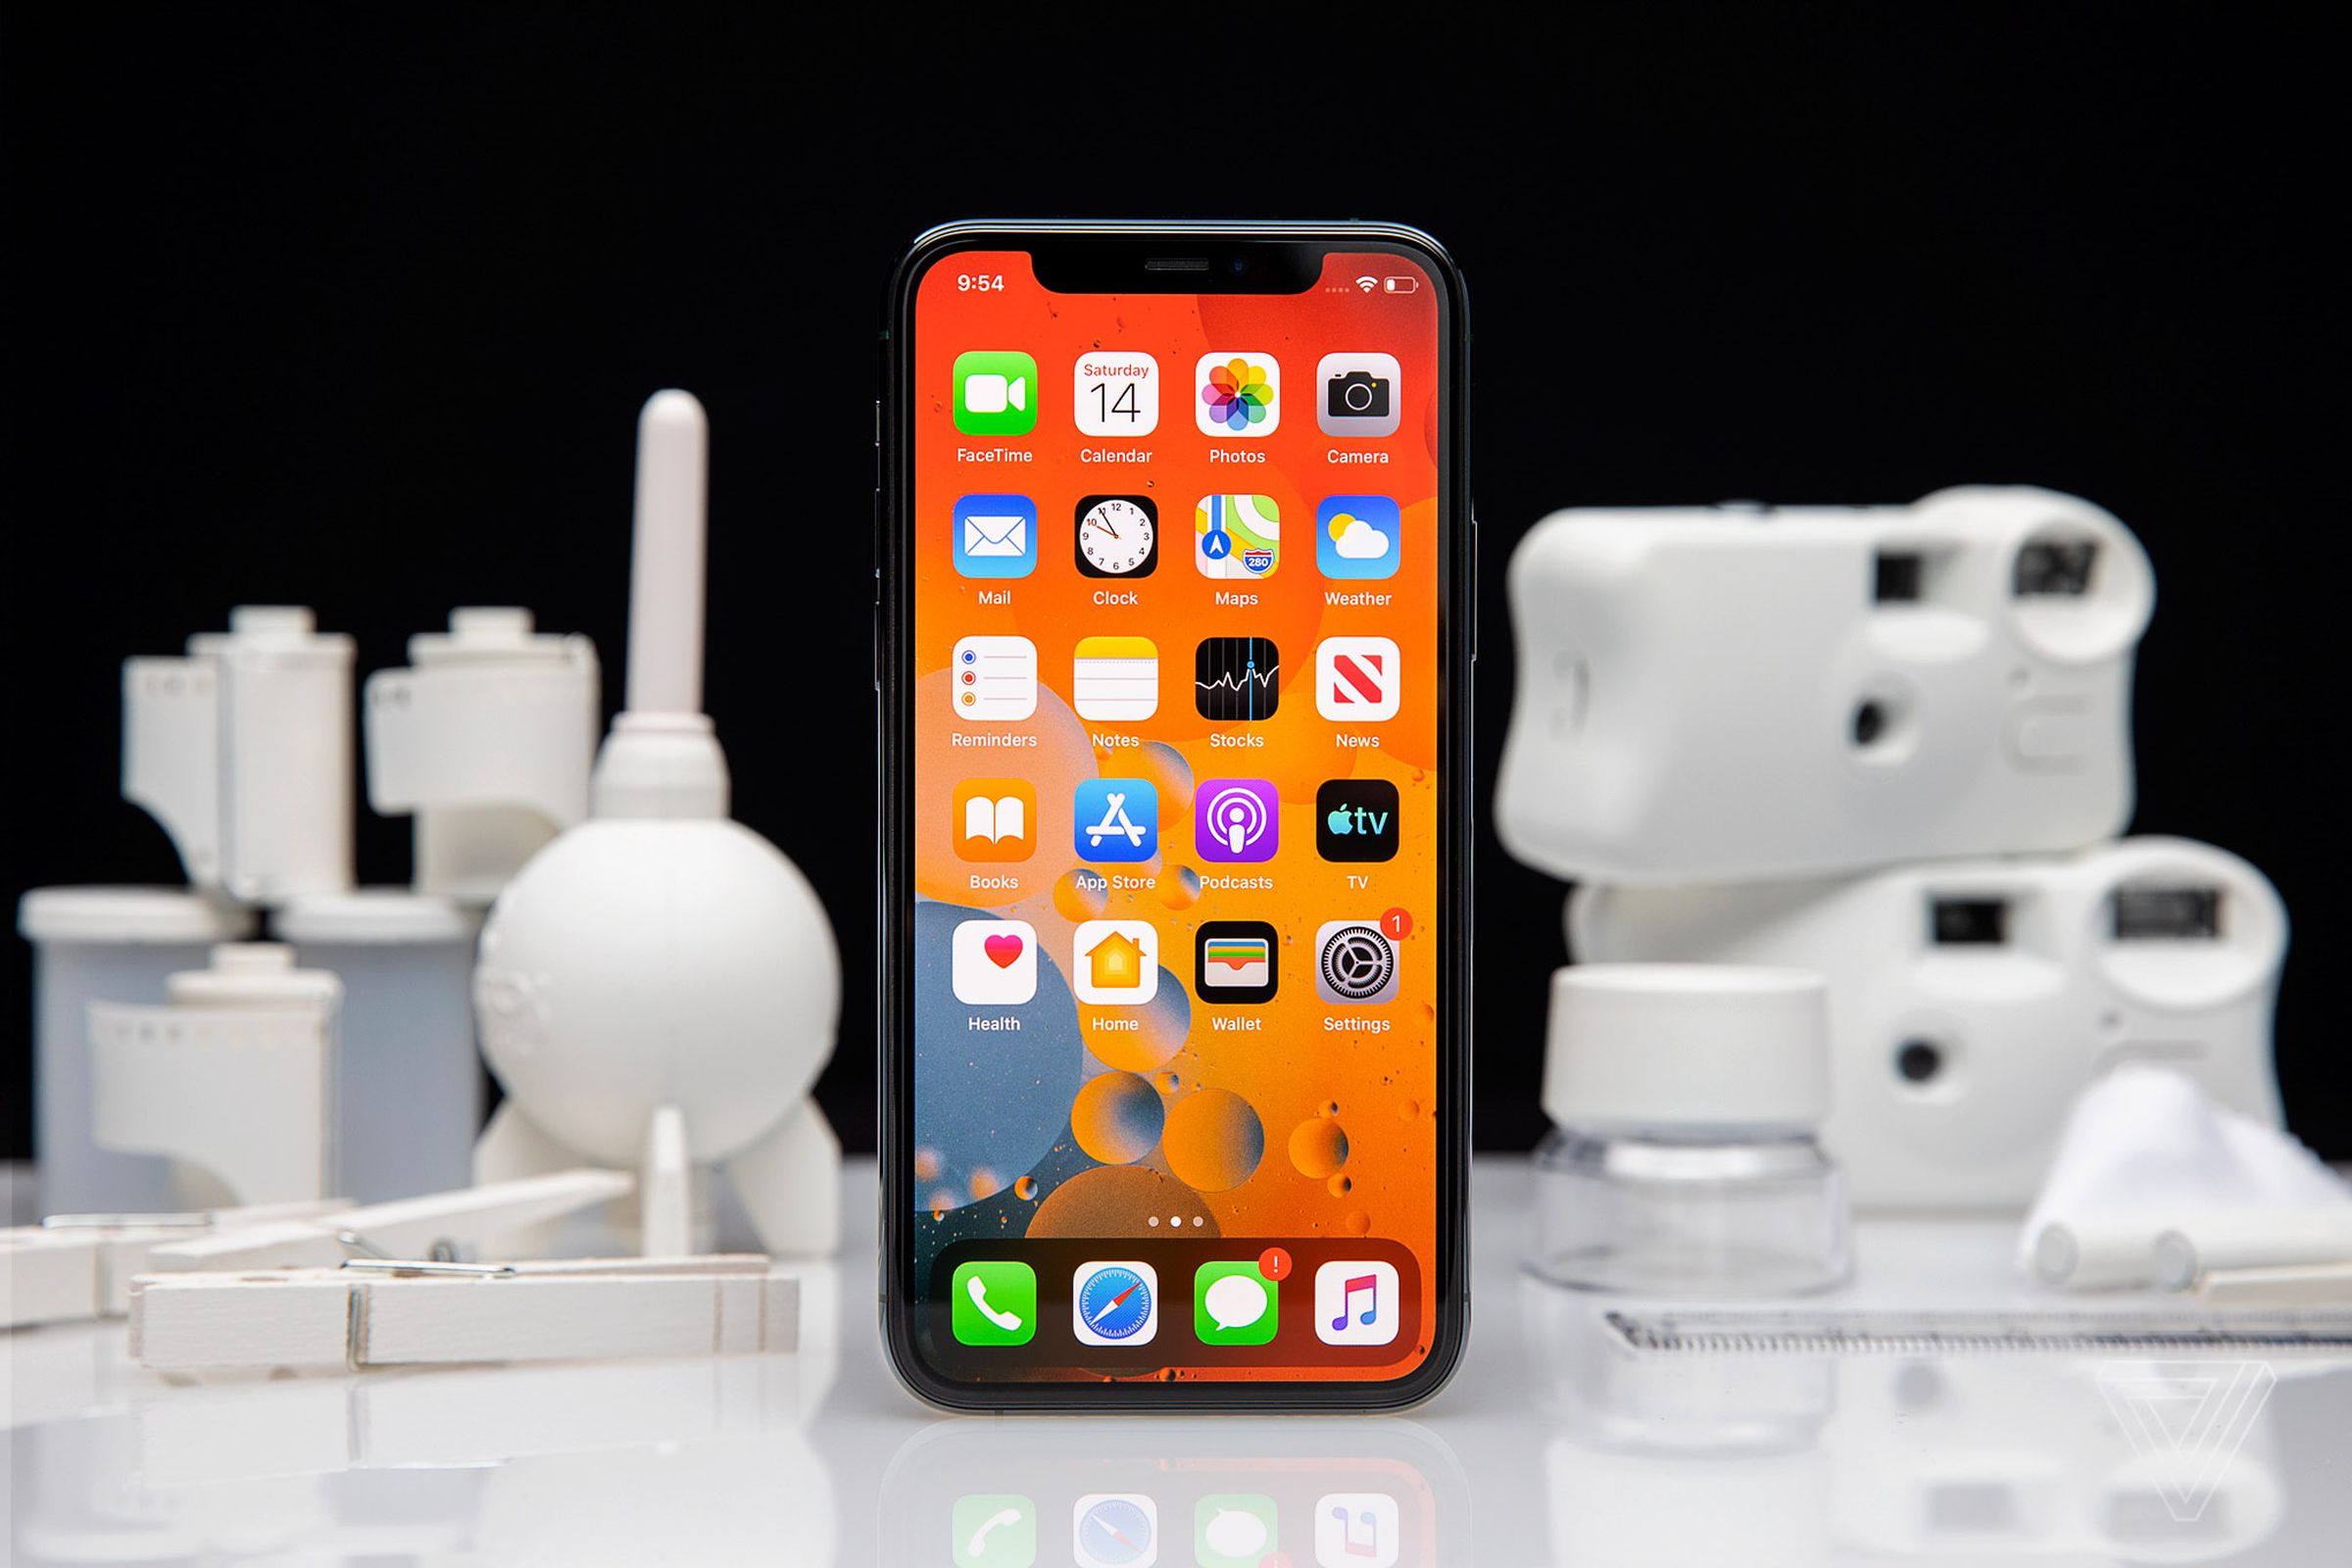 The iPhone 11 Pro. Not an iPhone 12.